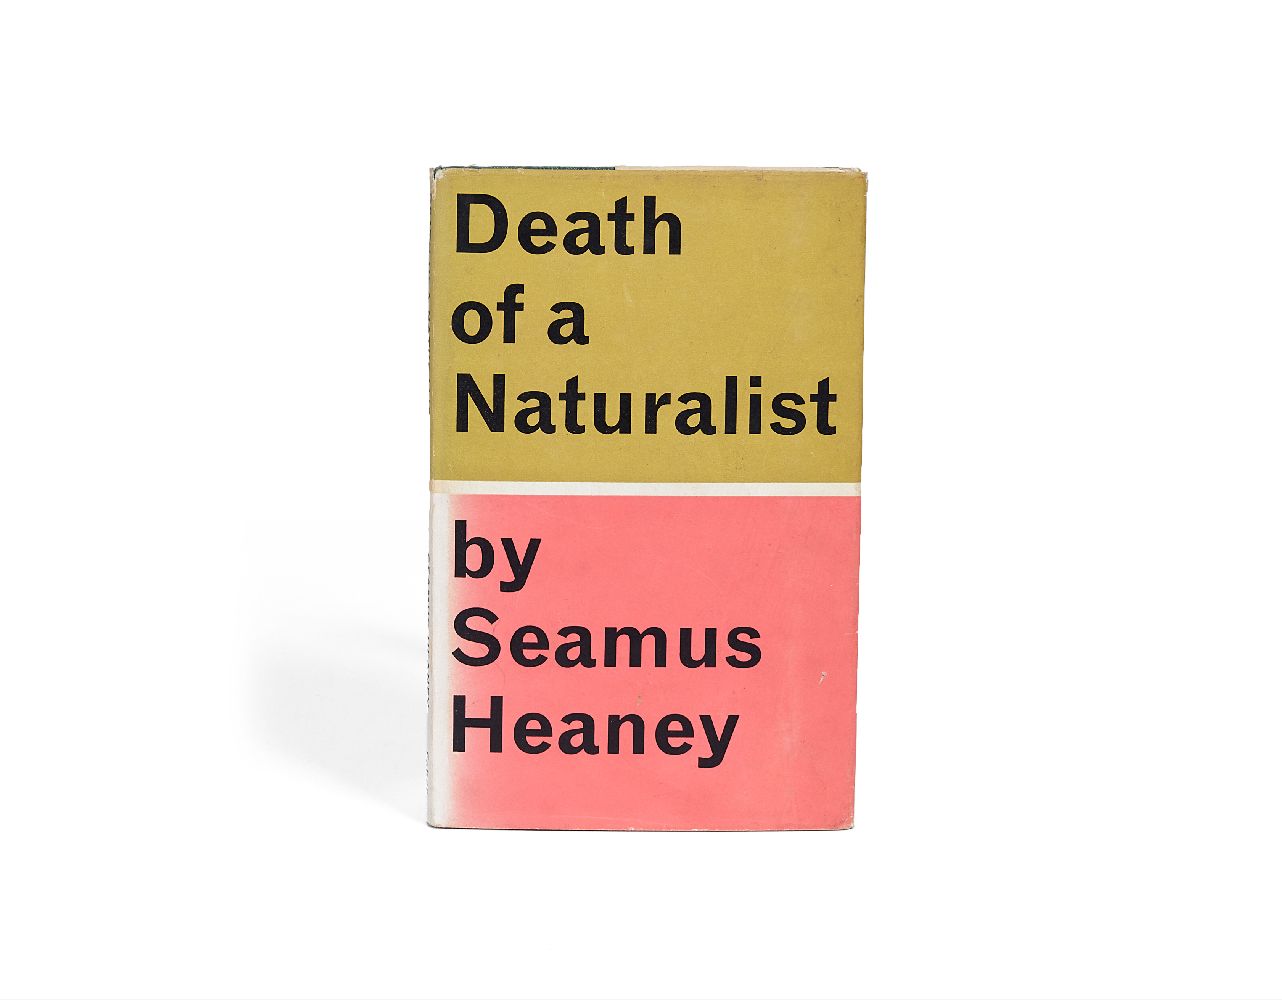 Ɵ Seamus Heaney, Death of a Naturalist, first edition, signed by the author [London, Faber and Faber